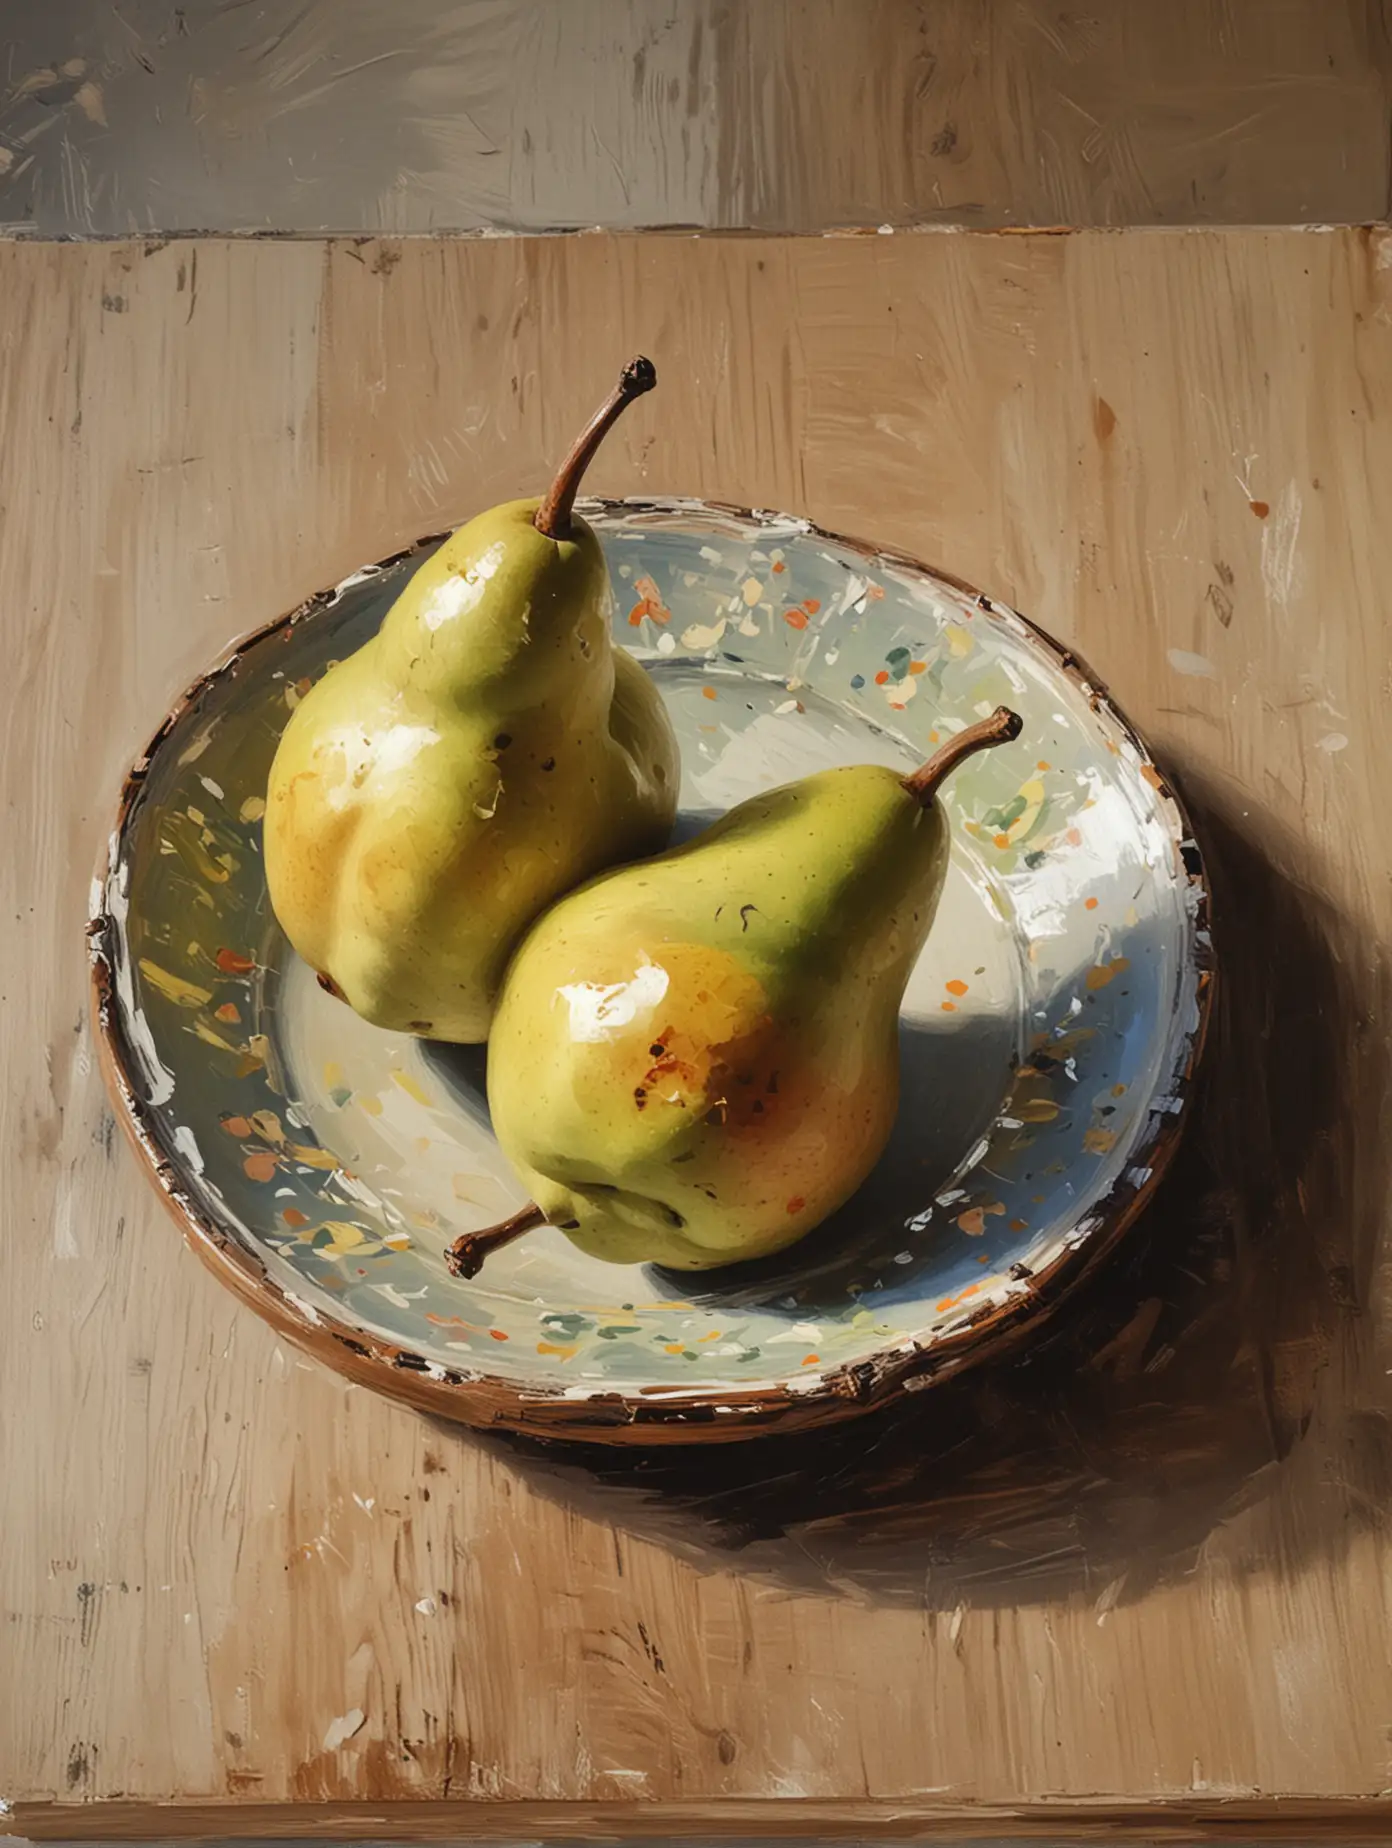 Impressionistic Painting of Pears on Wooden Table